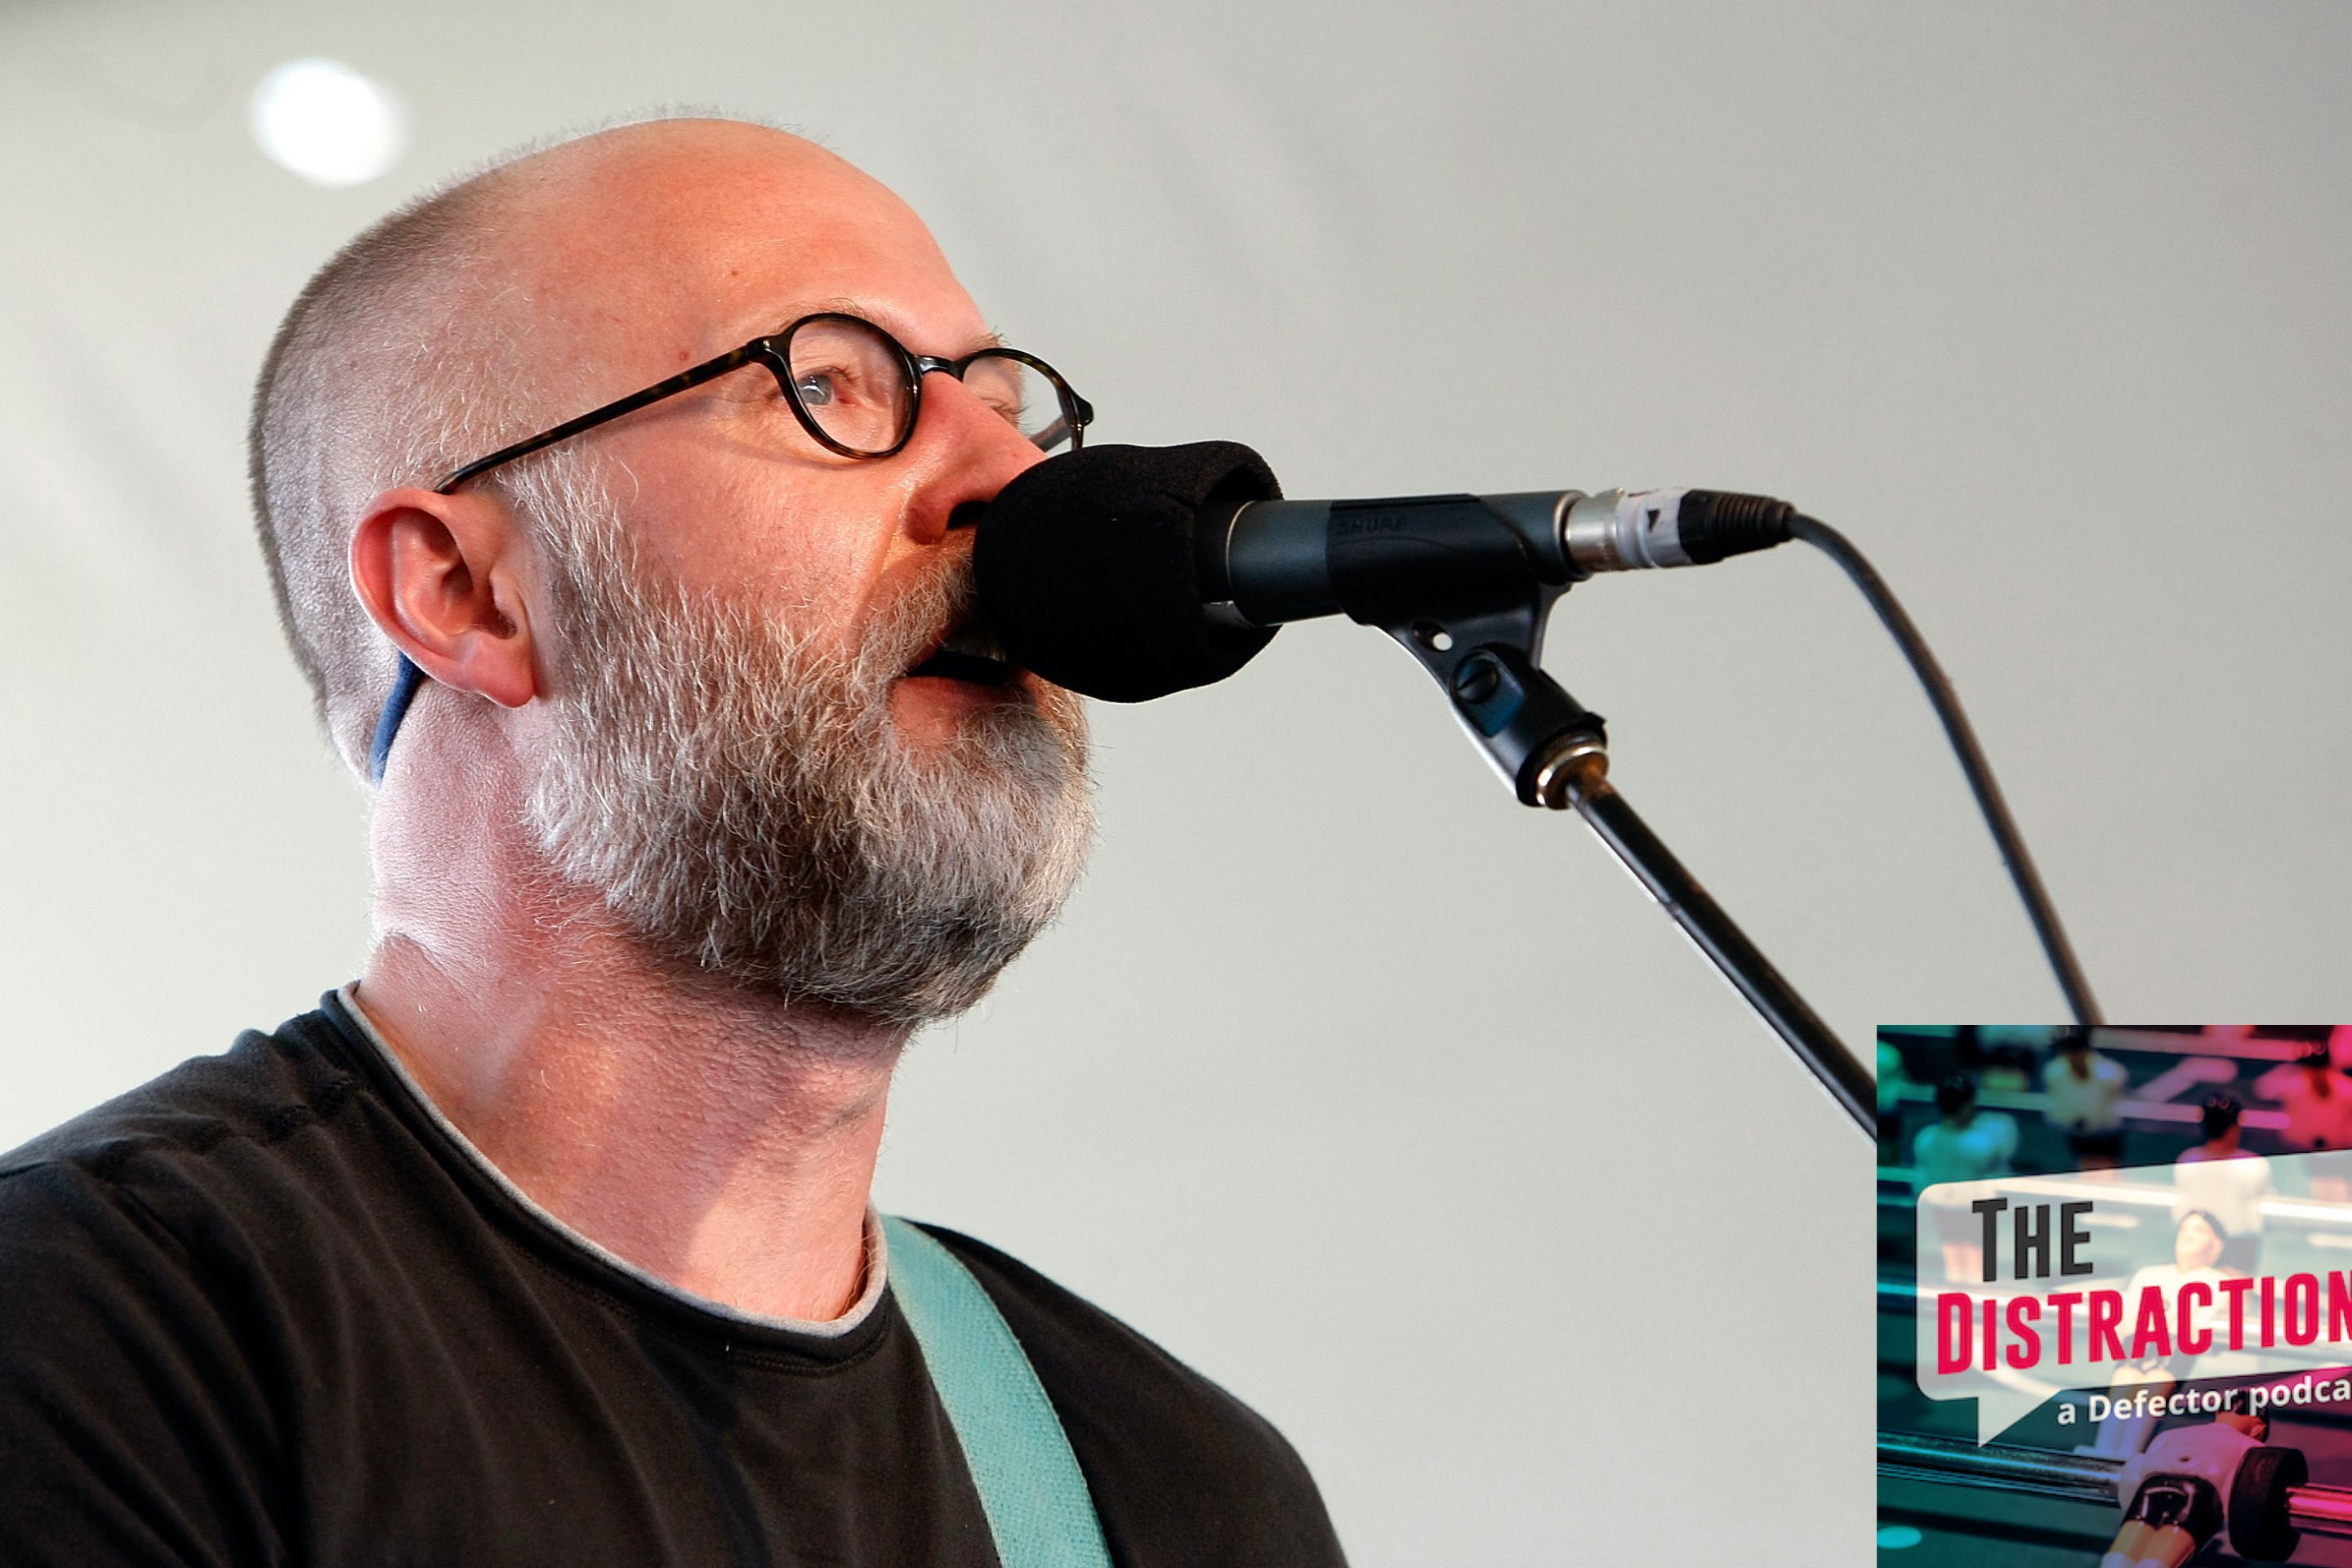 Bob Mould, pictured here not appearing on this podcast but rather performing at Coachella.